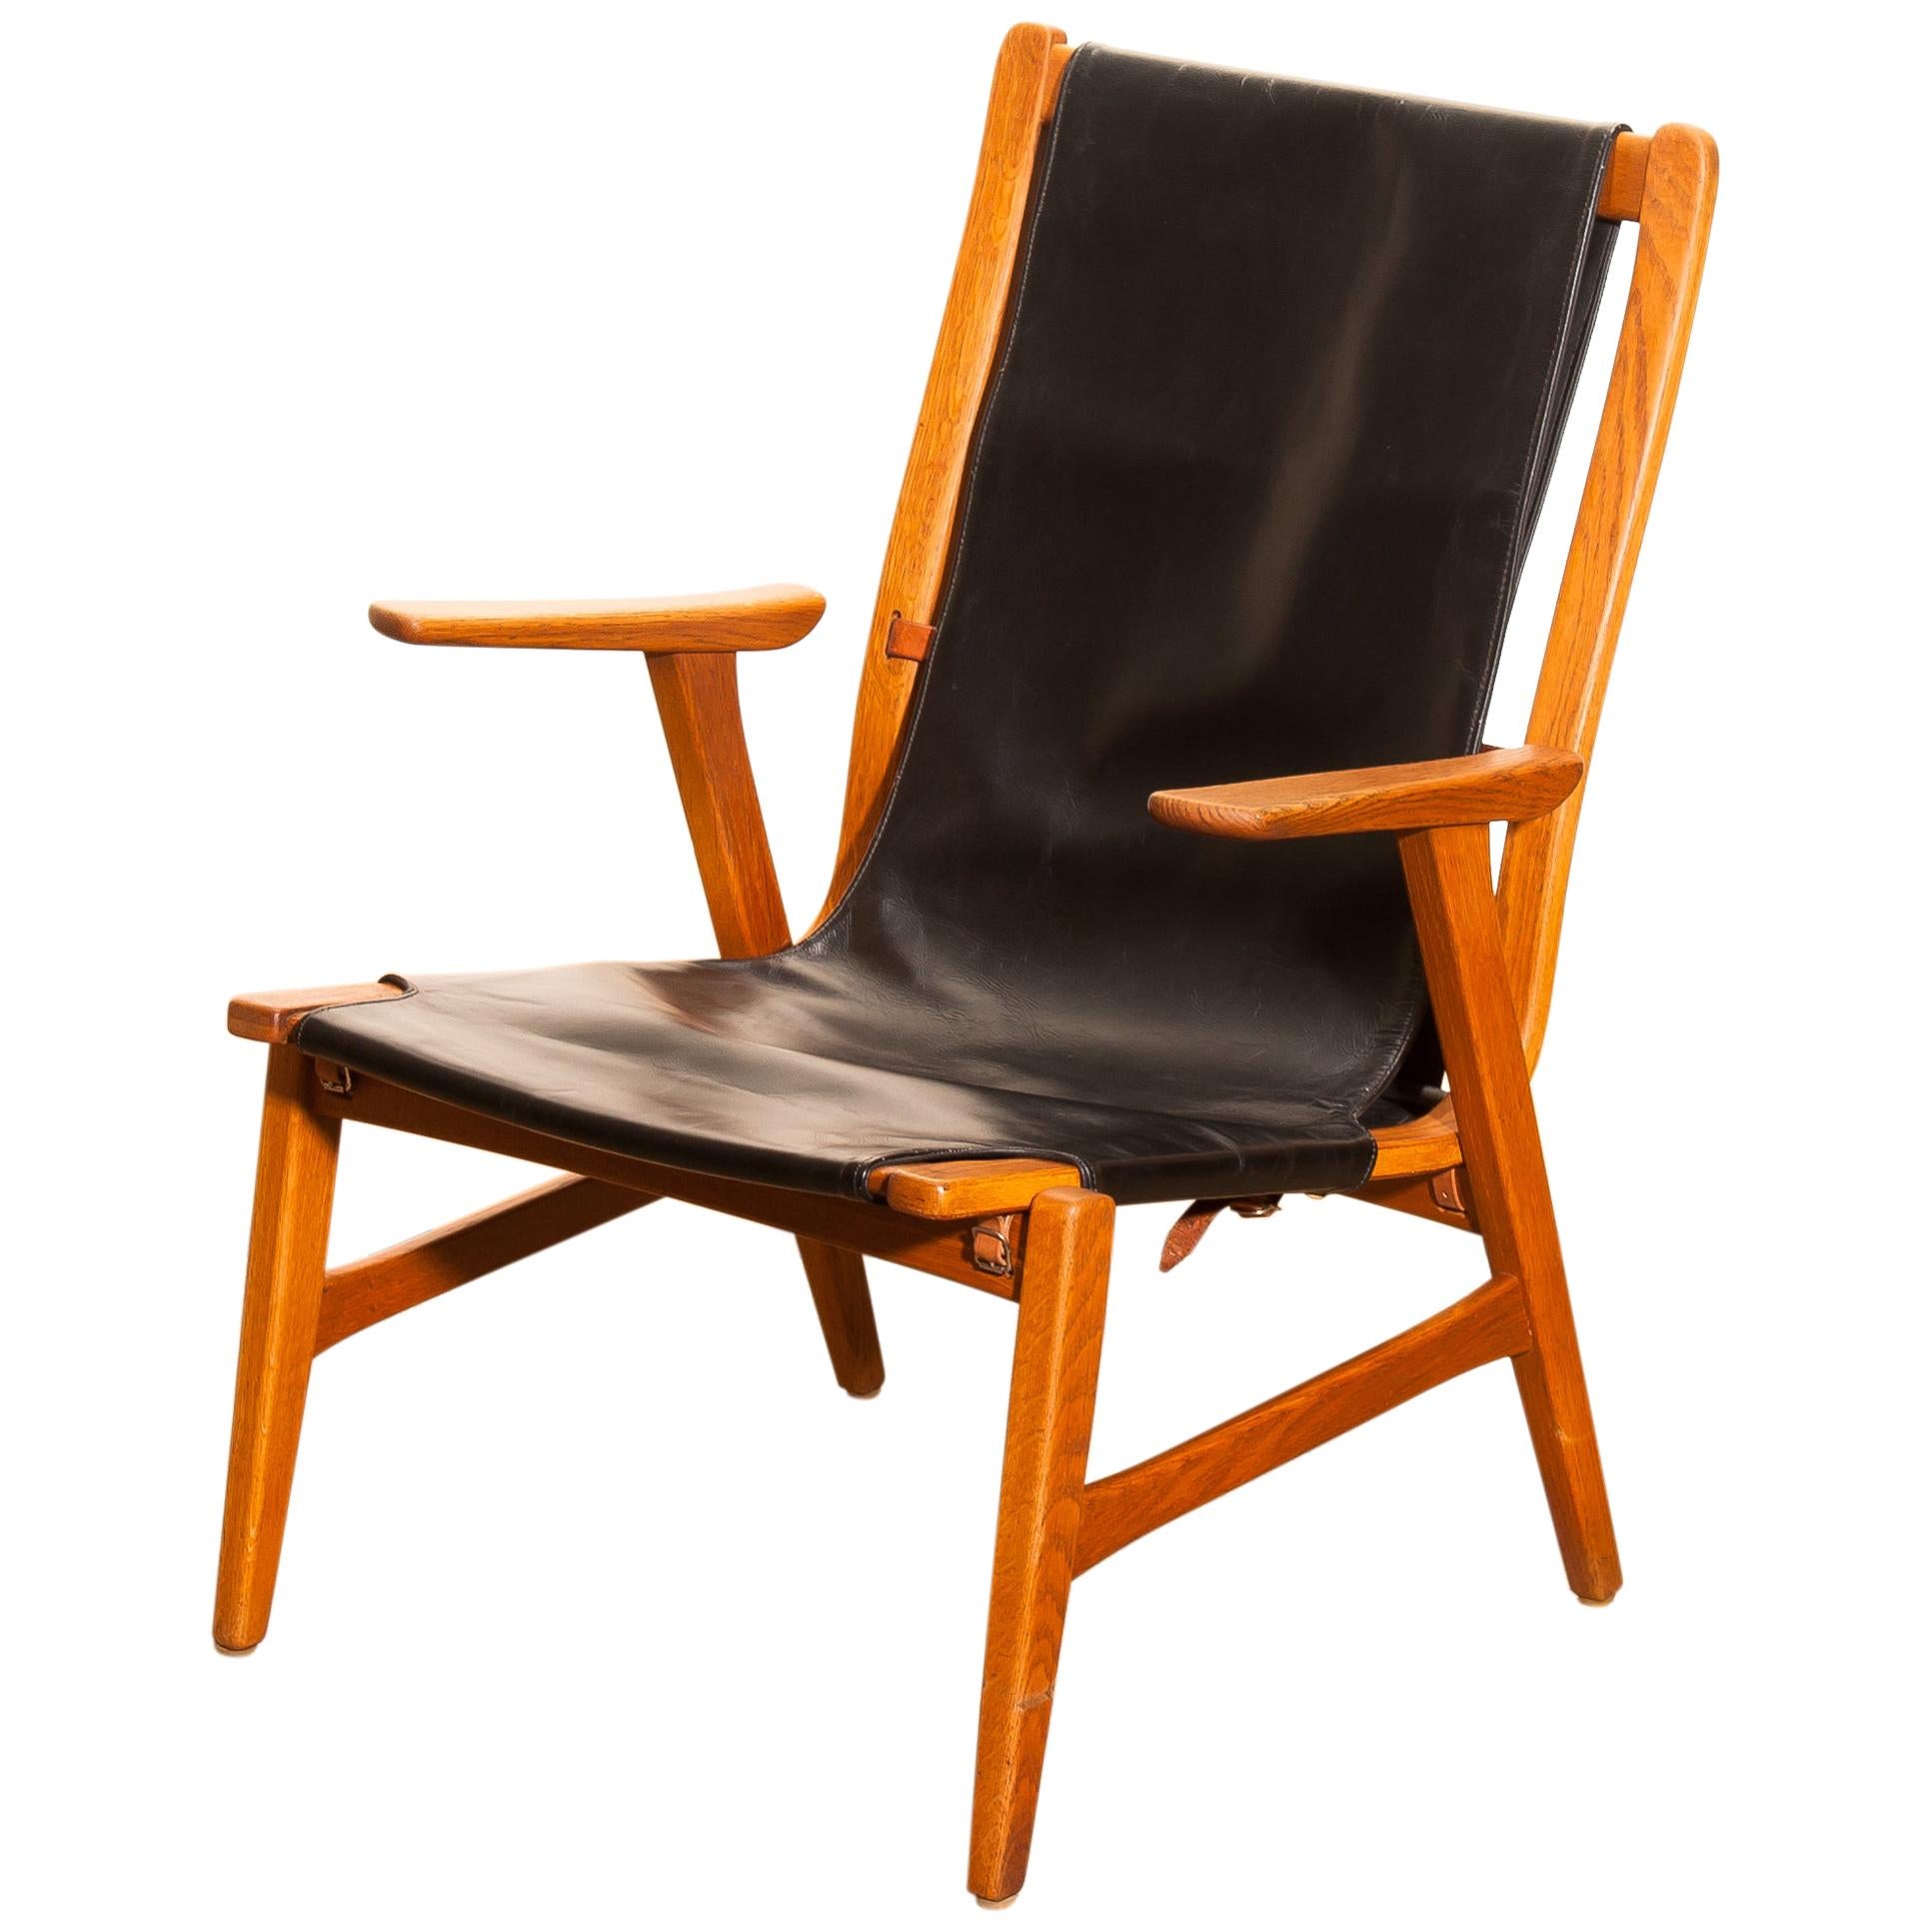 Mid-20th Century 1950s, Oak and Leatherette Hunting Chair 'Ulrika' by Östen Kristiansson